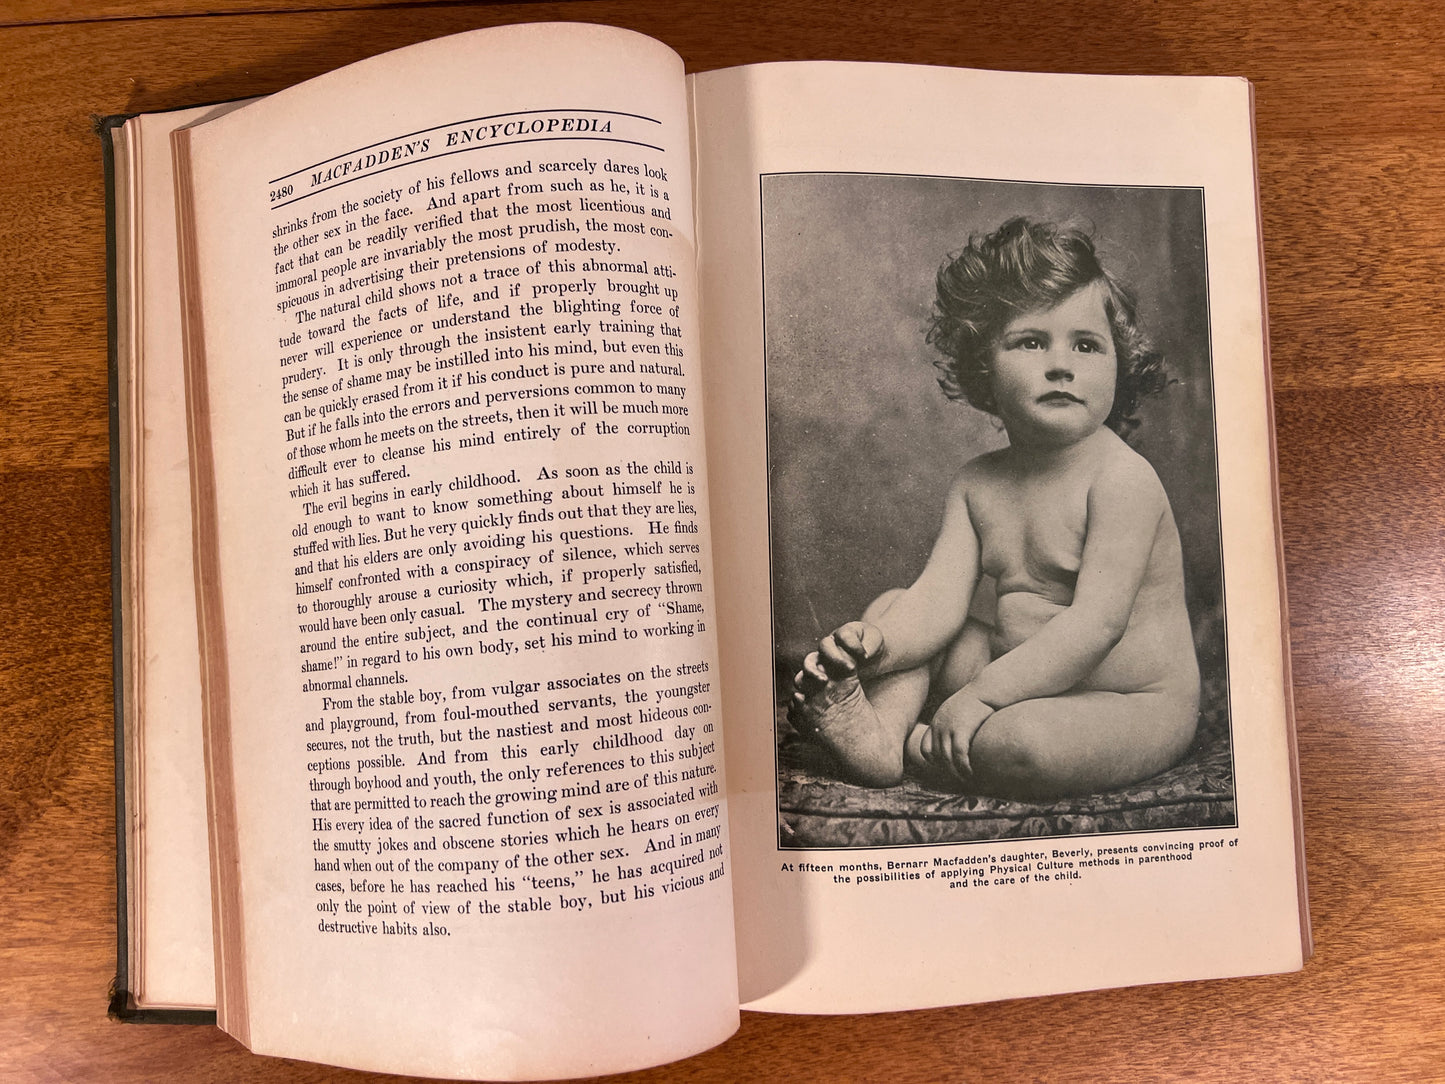 MacFadden's Enyclopedia of Physical Culture Vol. 5 - Sex Hygiene, Parenthood and Child Training [1920]